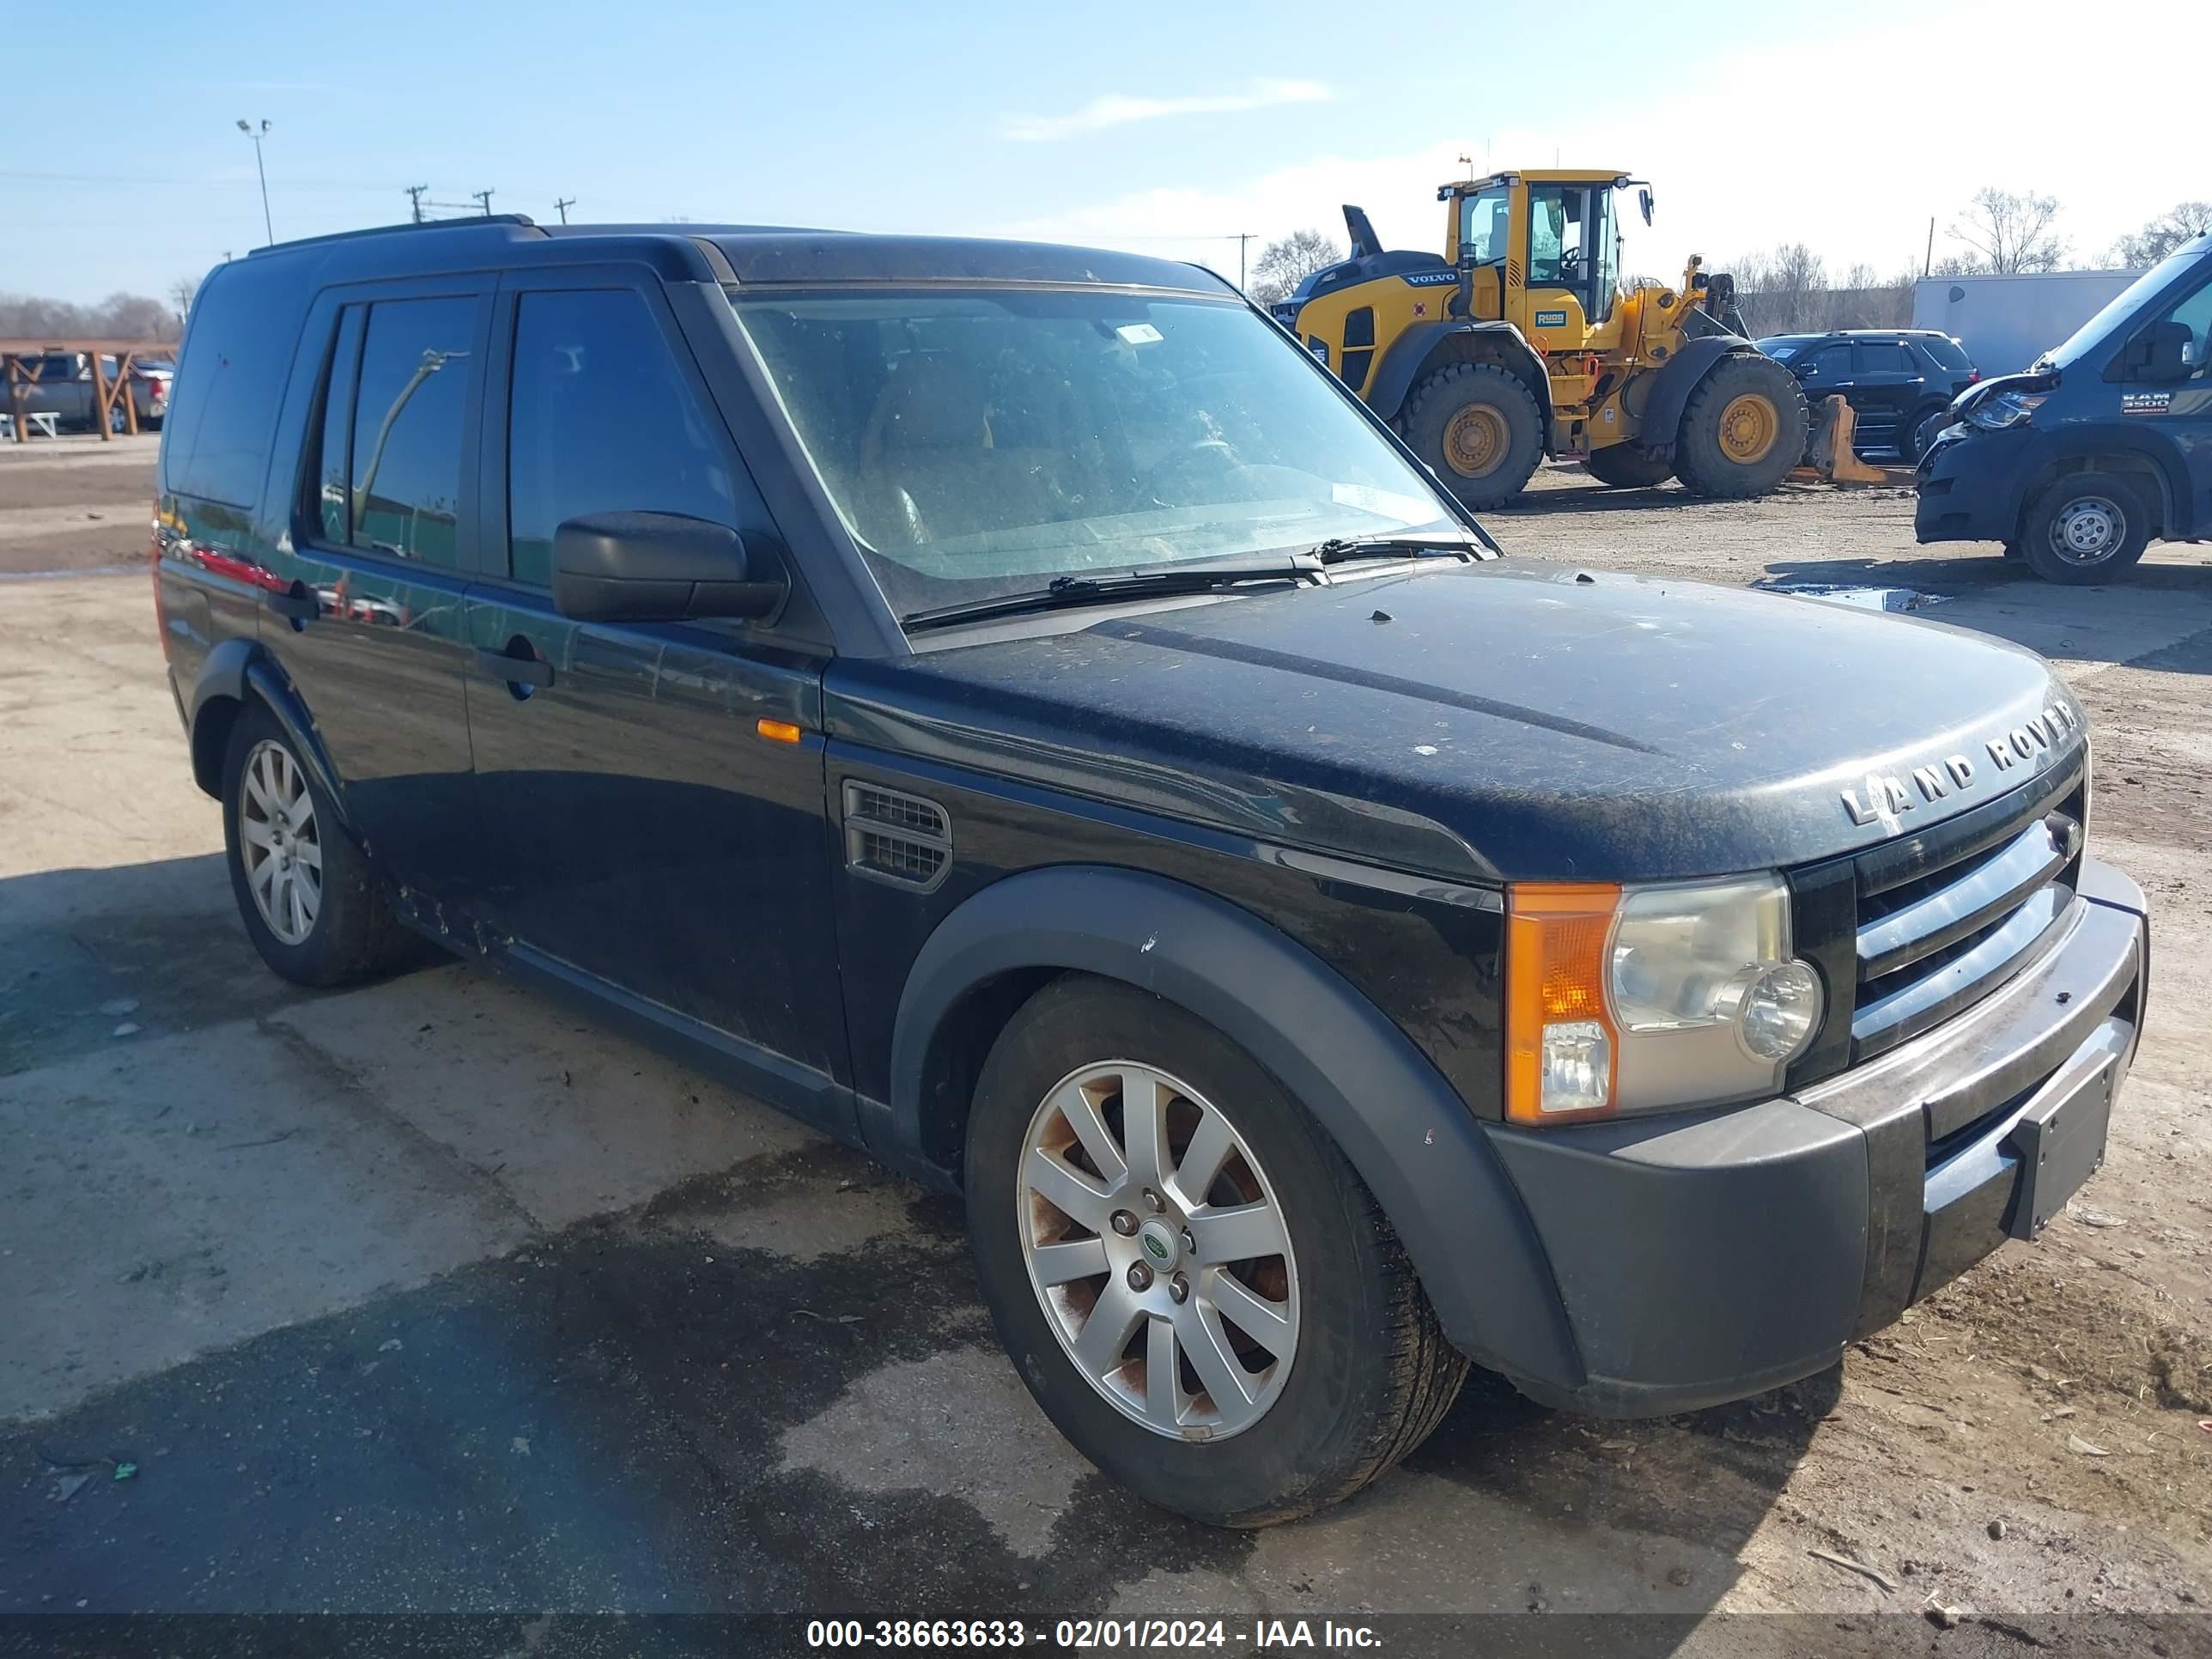 vin: SALAE25406A385293 SALAE25406A385293 2006 land rover lr3 4400 for Sale in 46619, 3202 W Sample St, South Bend, USA